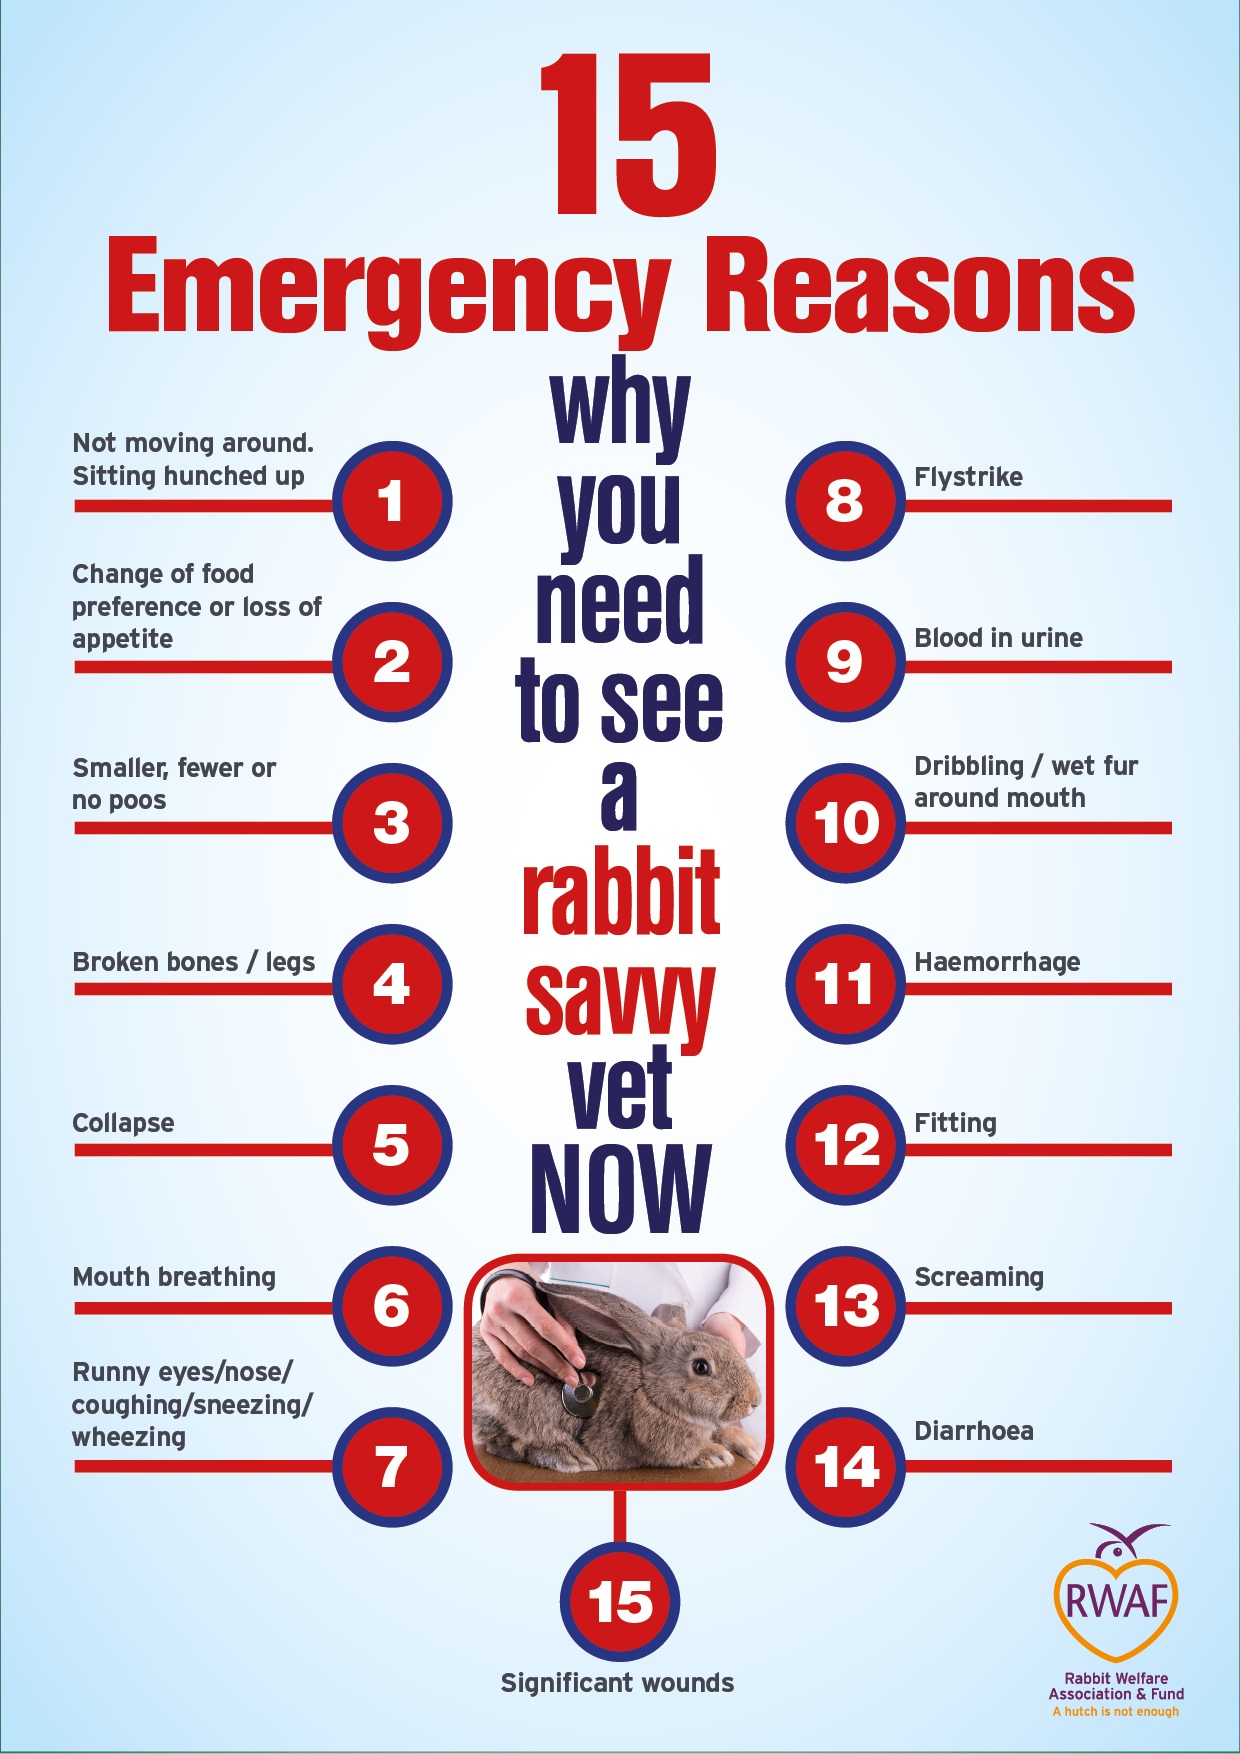 What are the vital signs of a healthy rabbit?